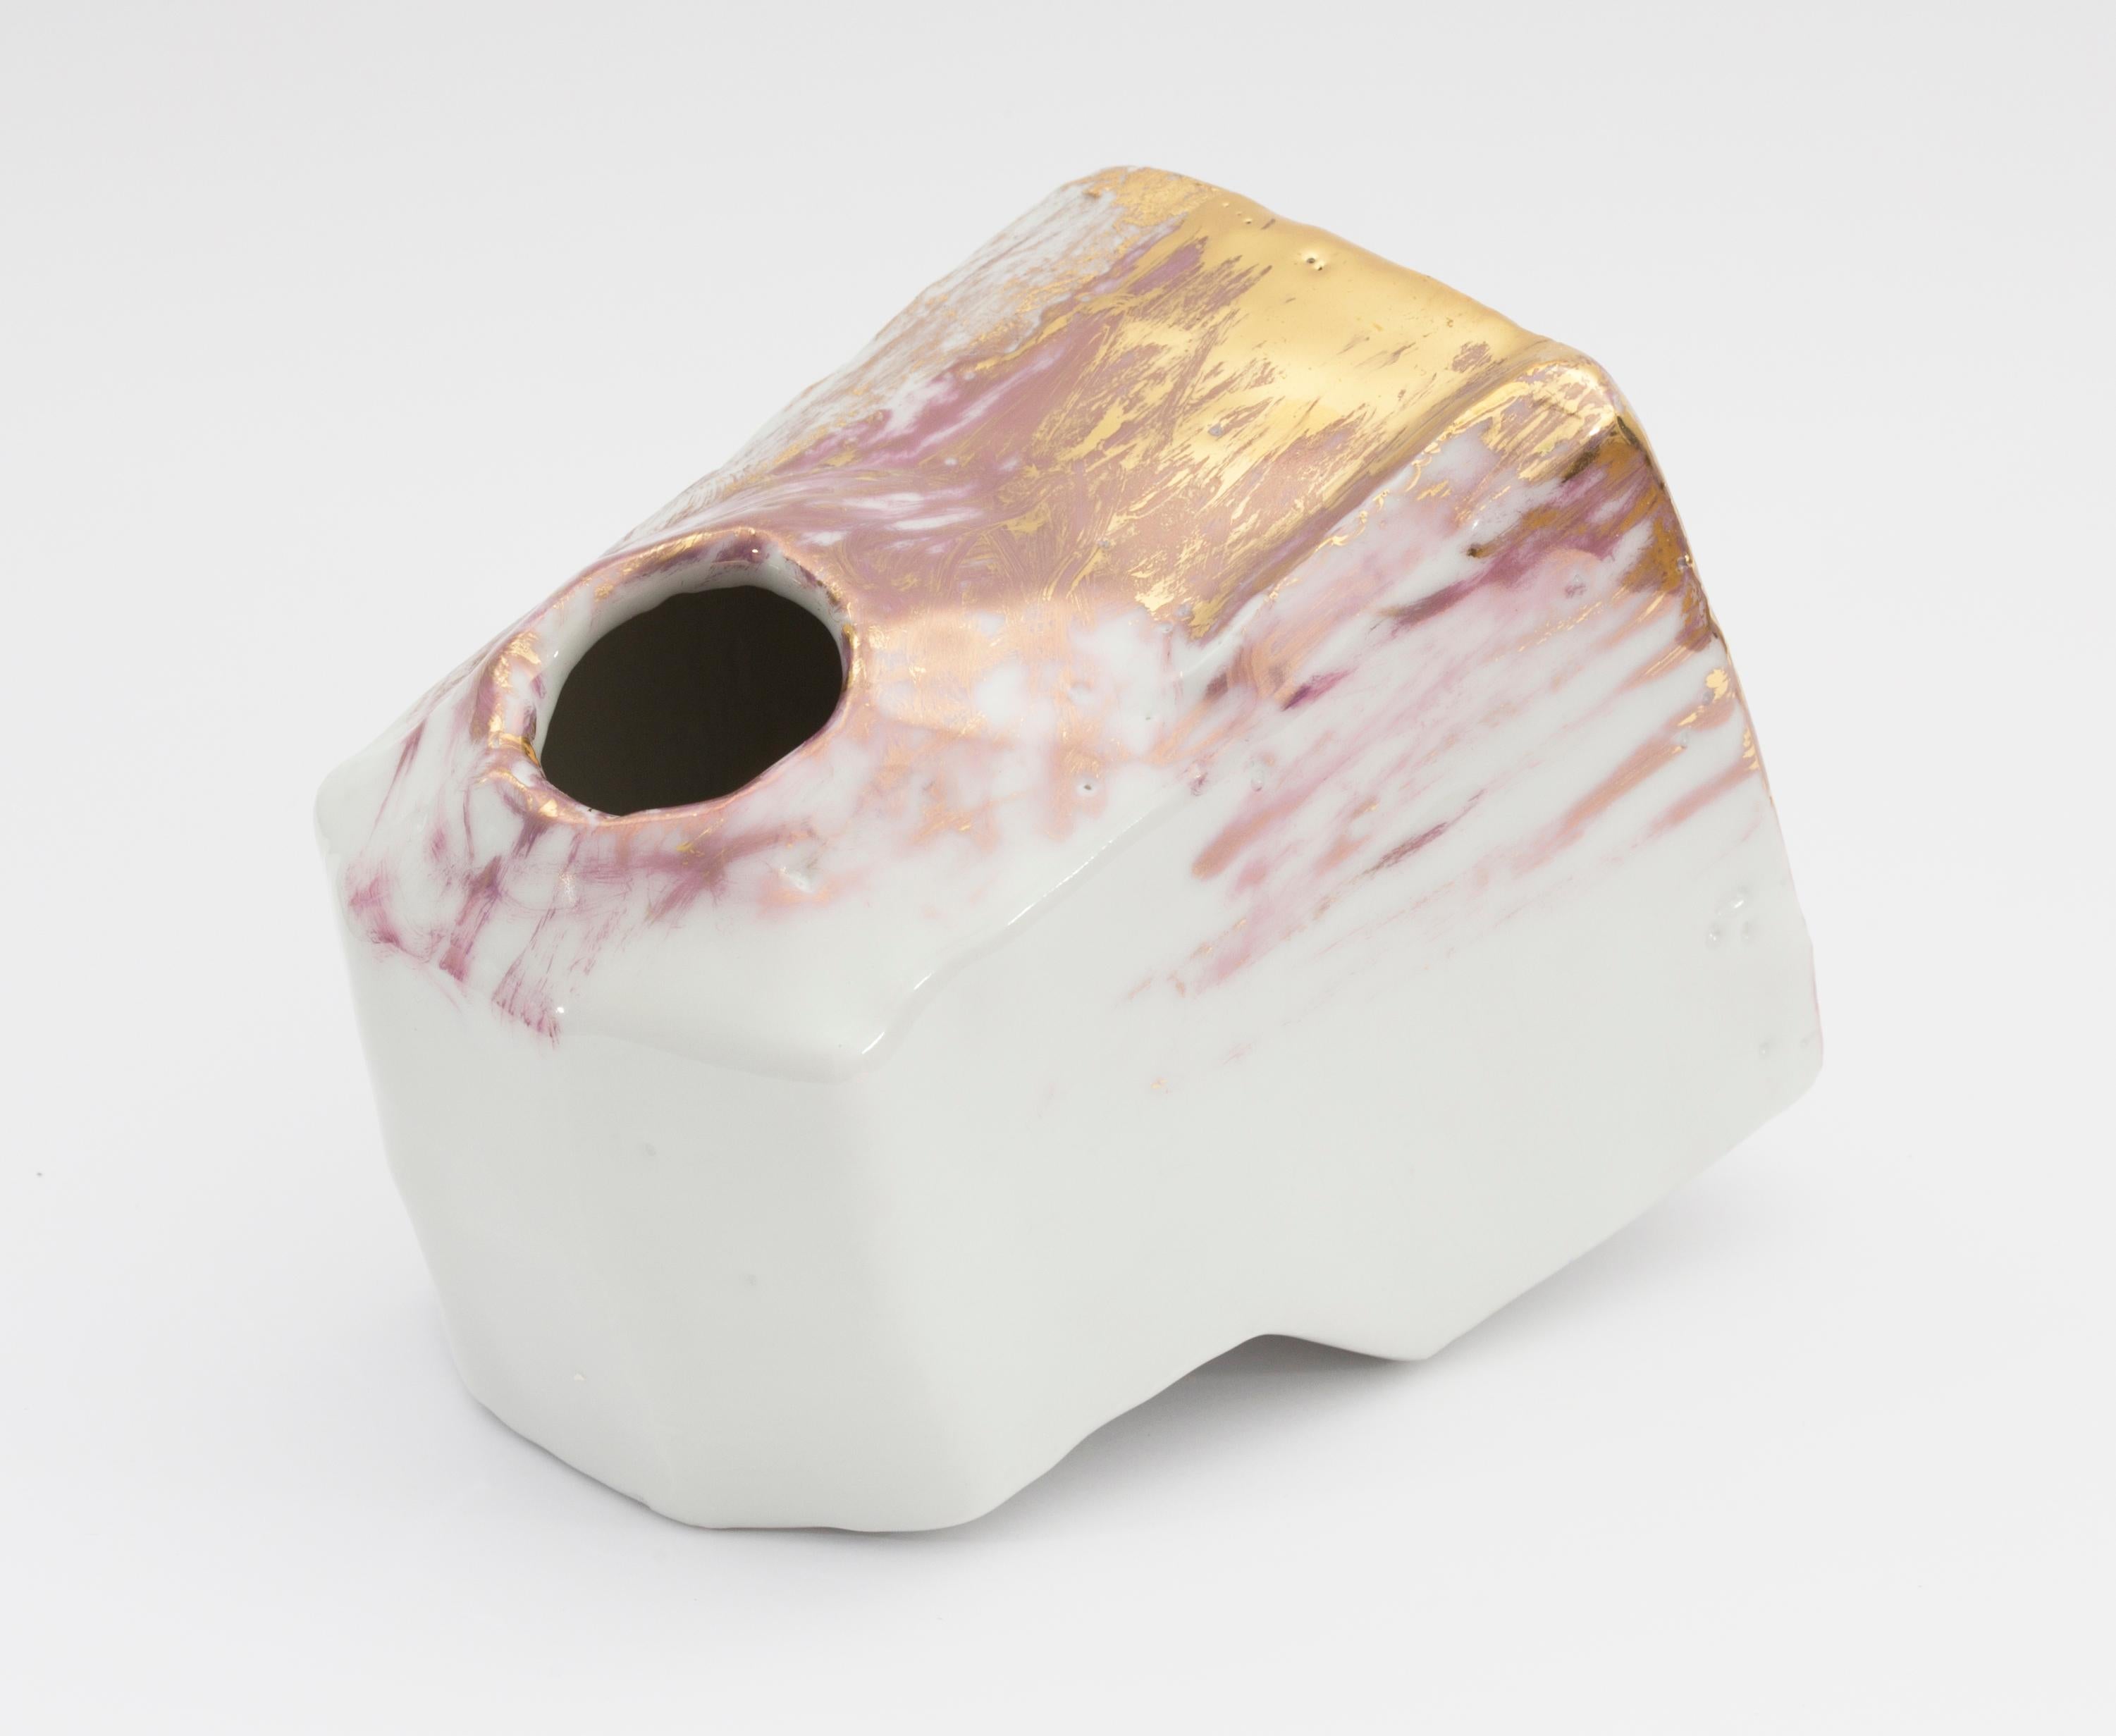 Shelter IV Decorative Object by Dora Stanczel
One of a Kind.
Dimensions: D 9 x W 14 x H 11 cm.
Materials: Porcelain, colored glaze and gold.

Dimensions are variable. A wooden stand can be included. Please contact us.

I create bespoke and luxurious